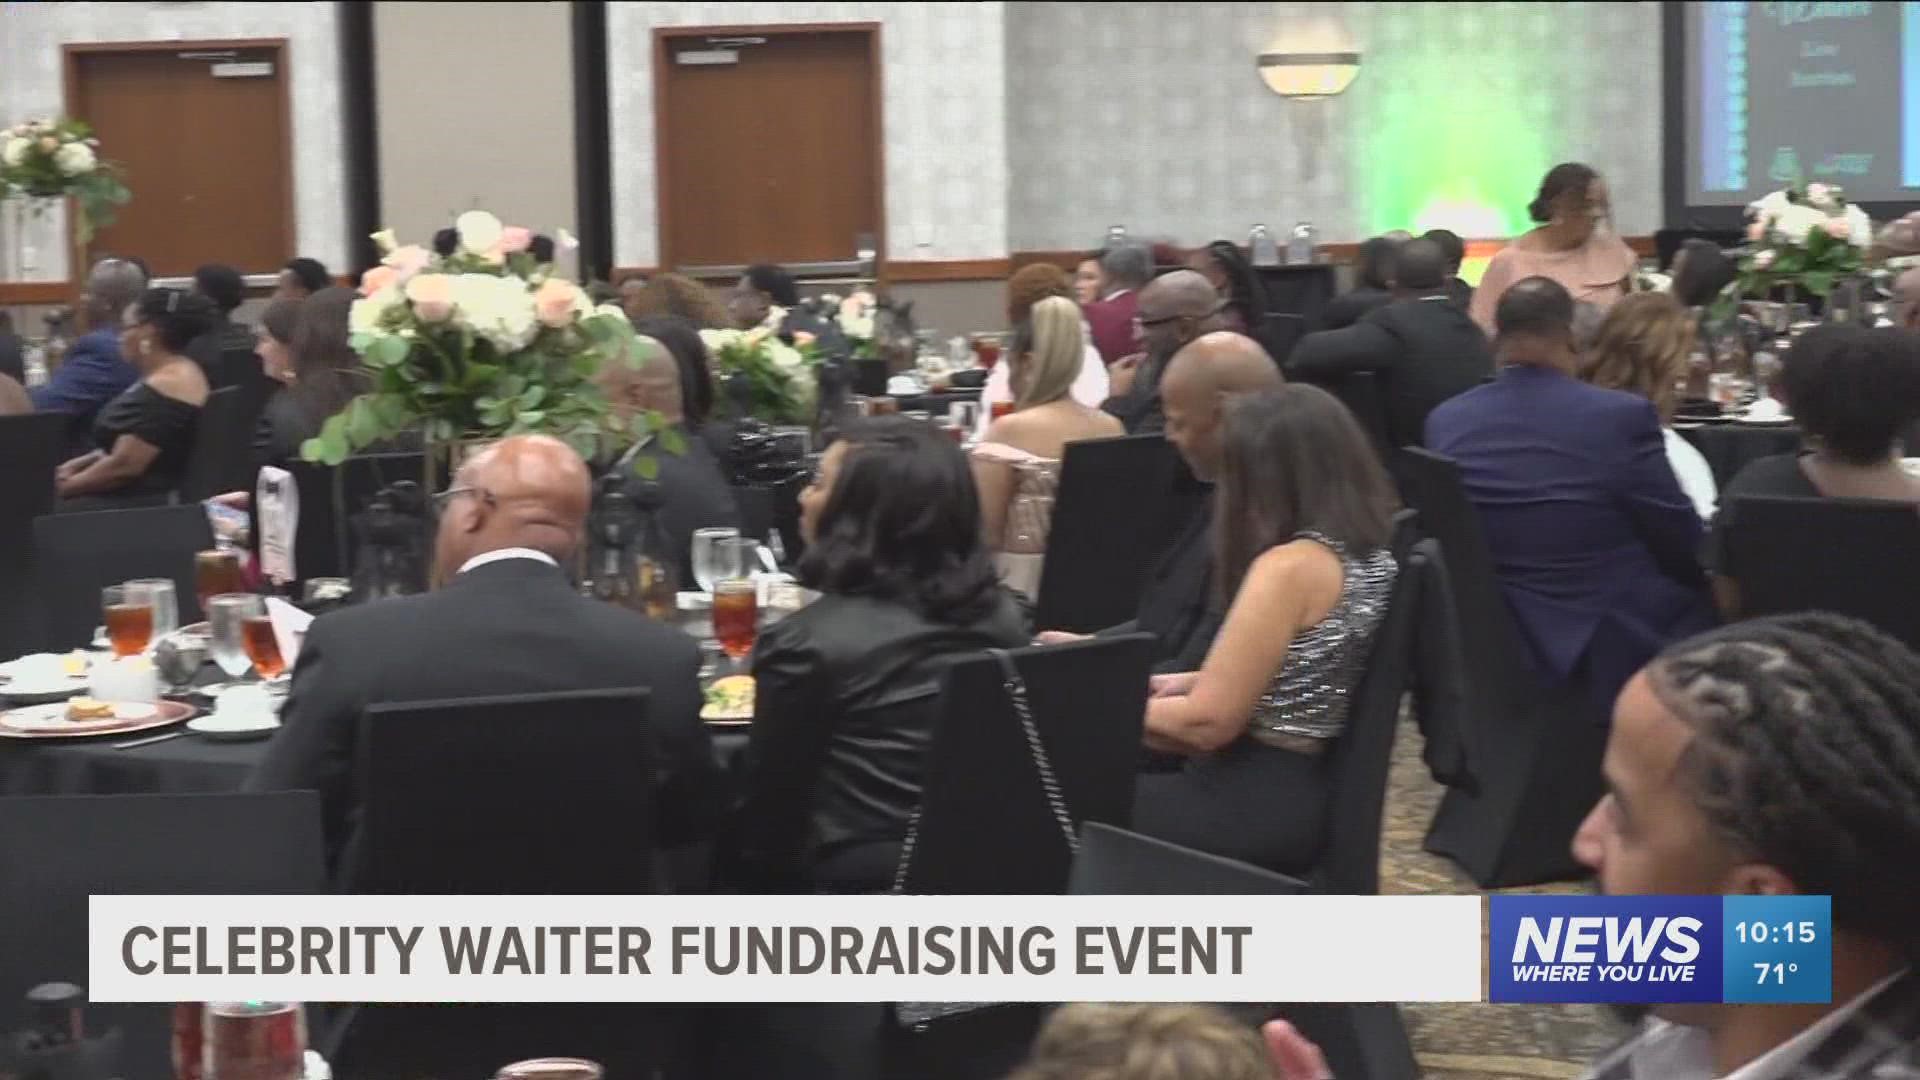 The Phi Alpha Omega chapter and the Tea Rose foundation hosted the 23rd annual celebrity waiter fundraising event to award scholarships to 16 students in NWA.